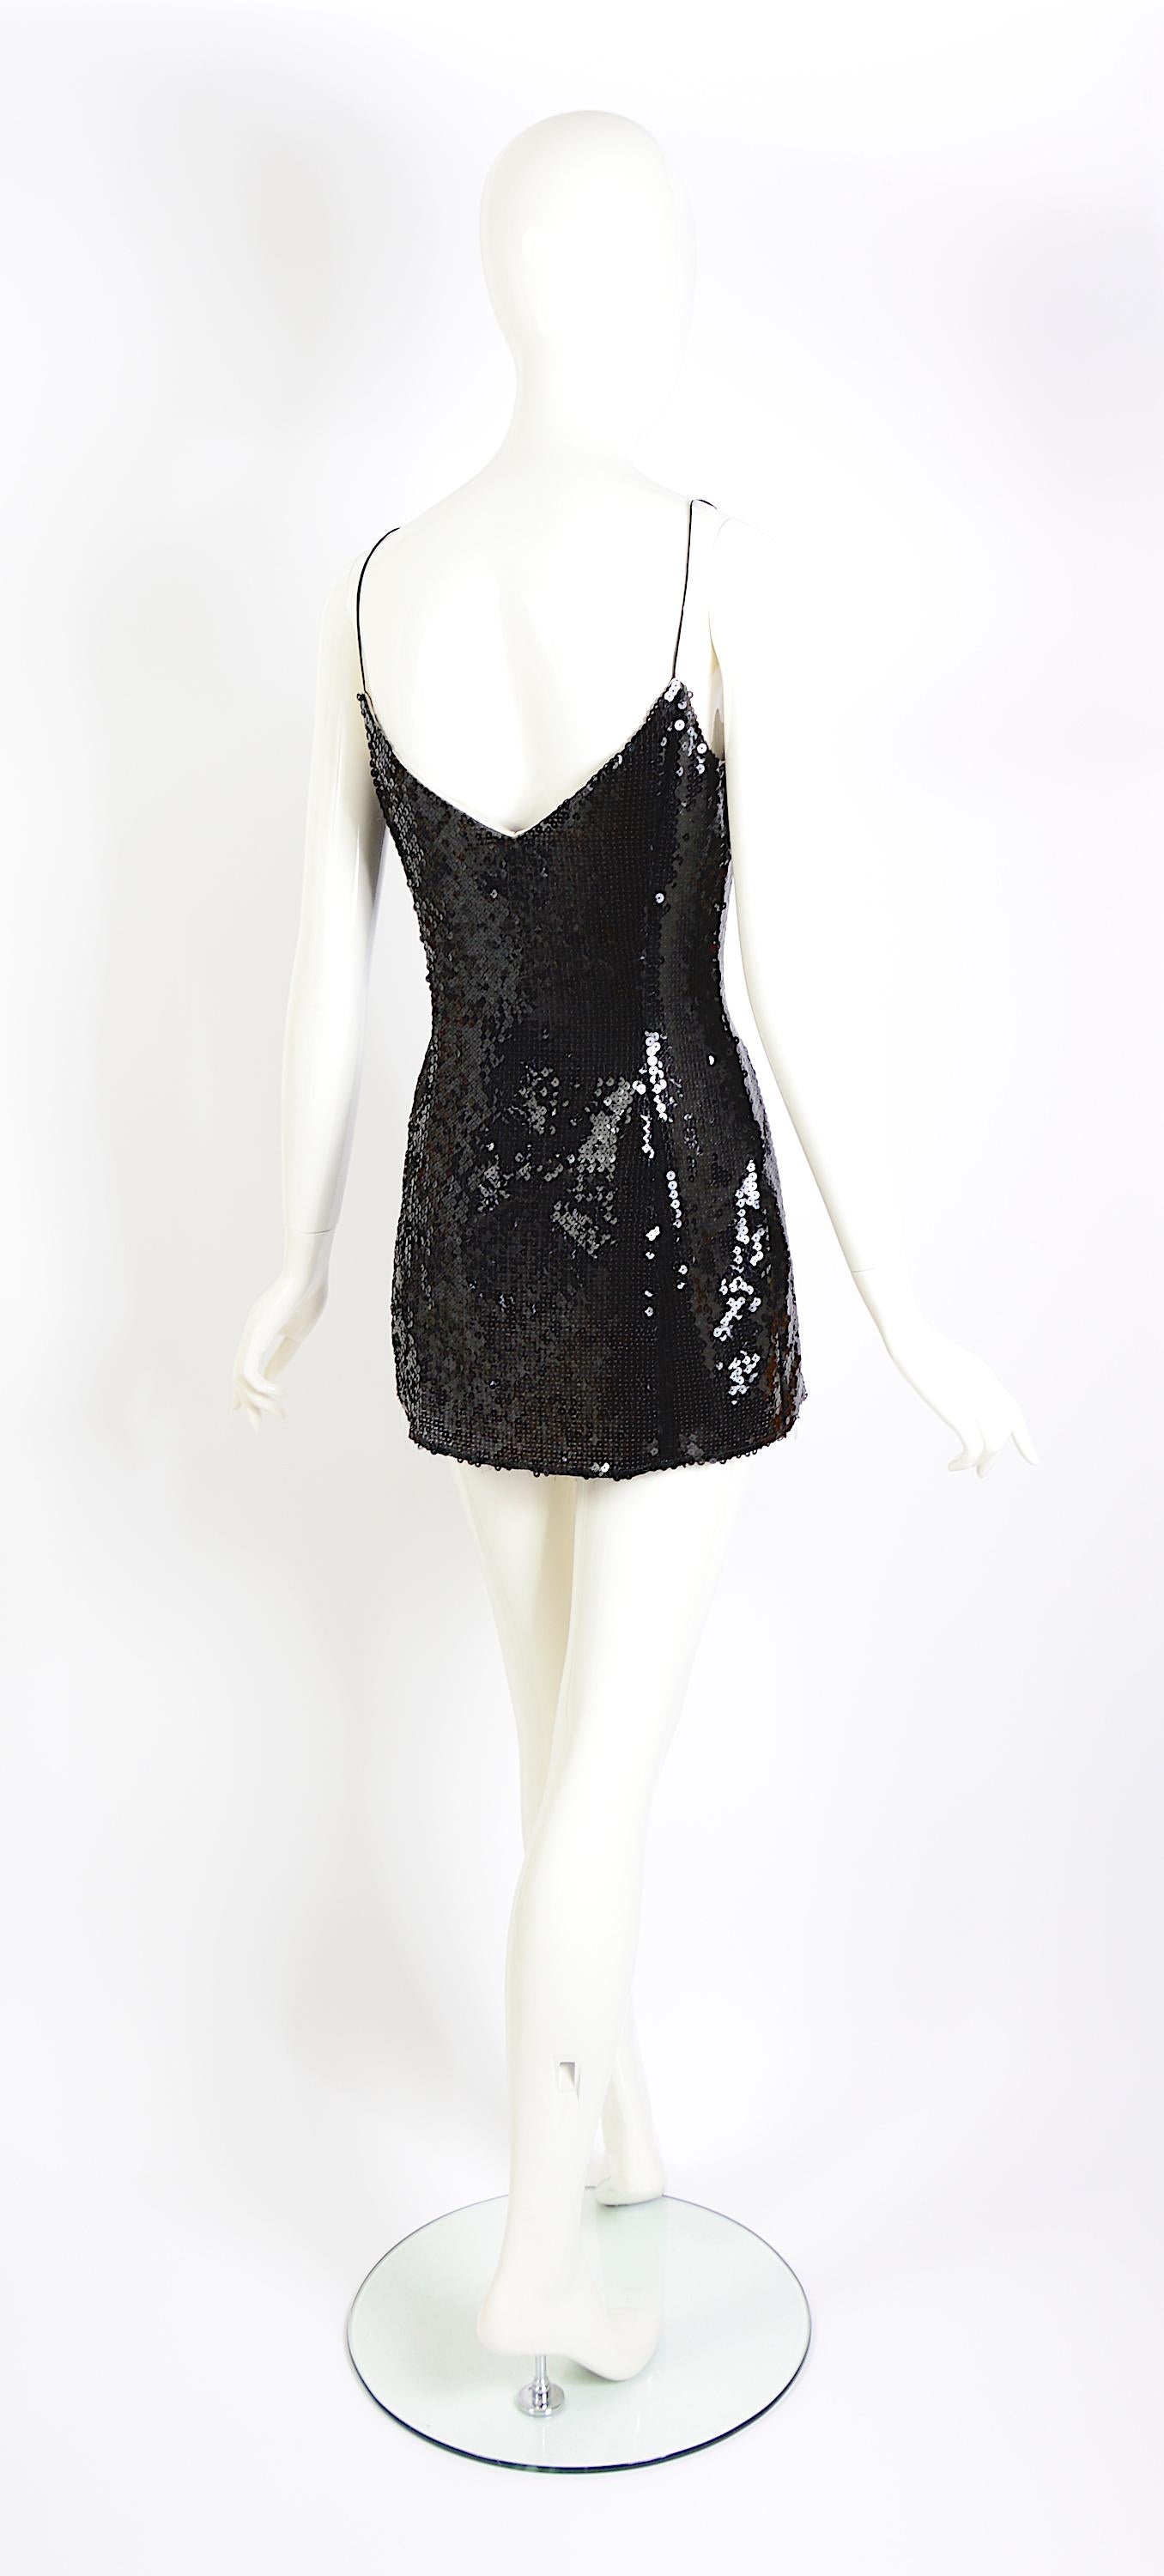 Black Thierry Mugler couture numbered black sequins spaghetti straps mini dress or top